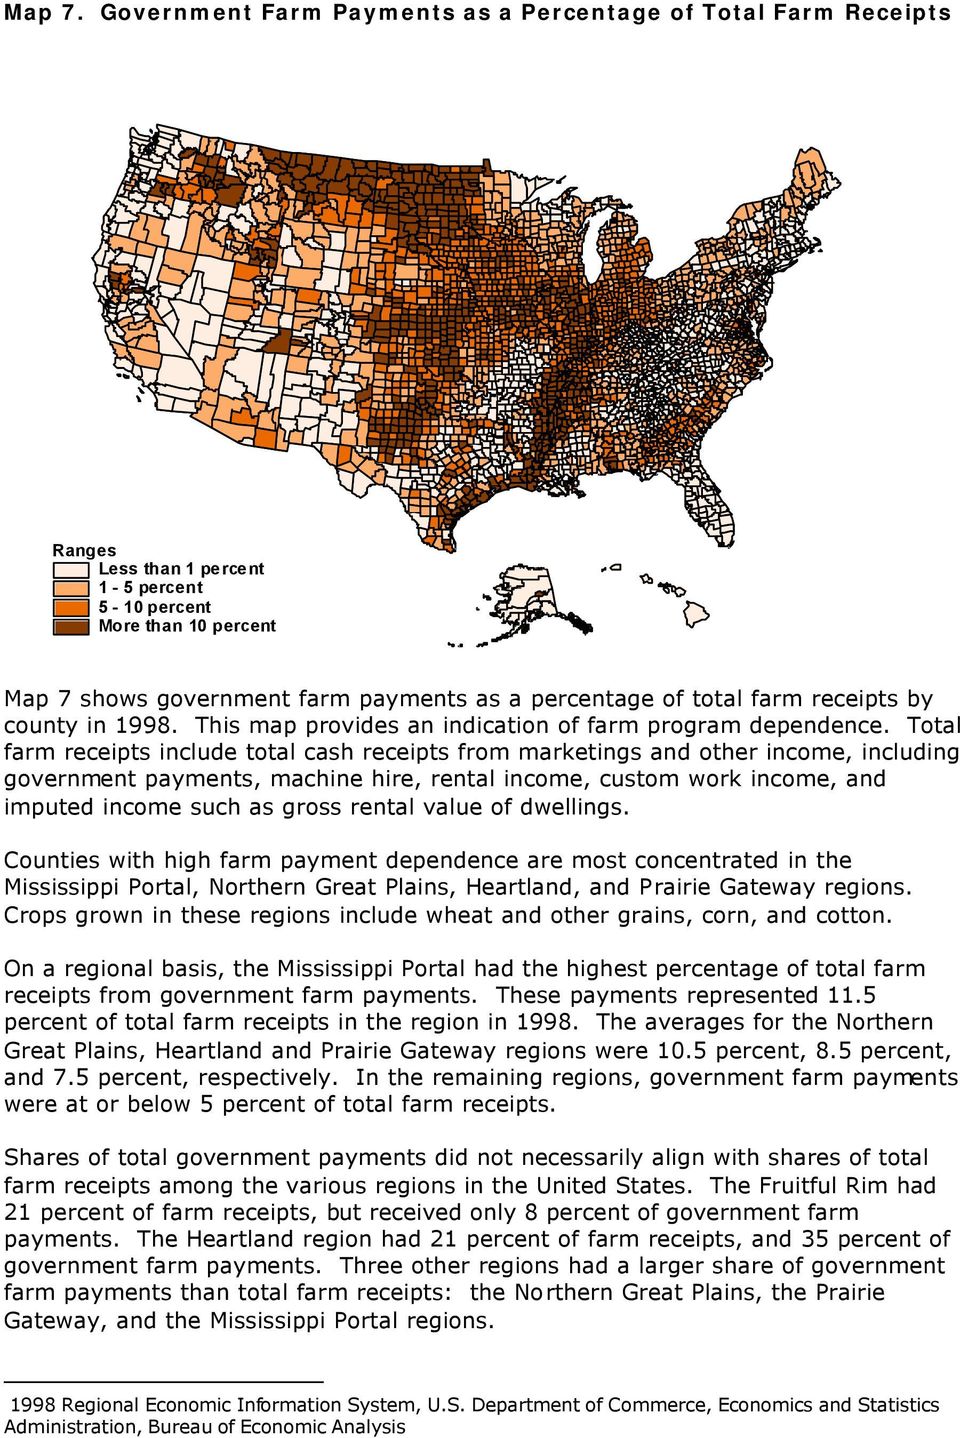 receipts by county in 1998. This map provides an indication of farm program dependence.